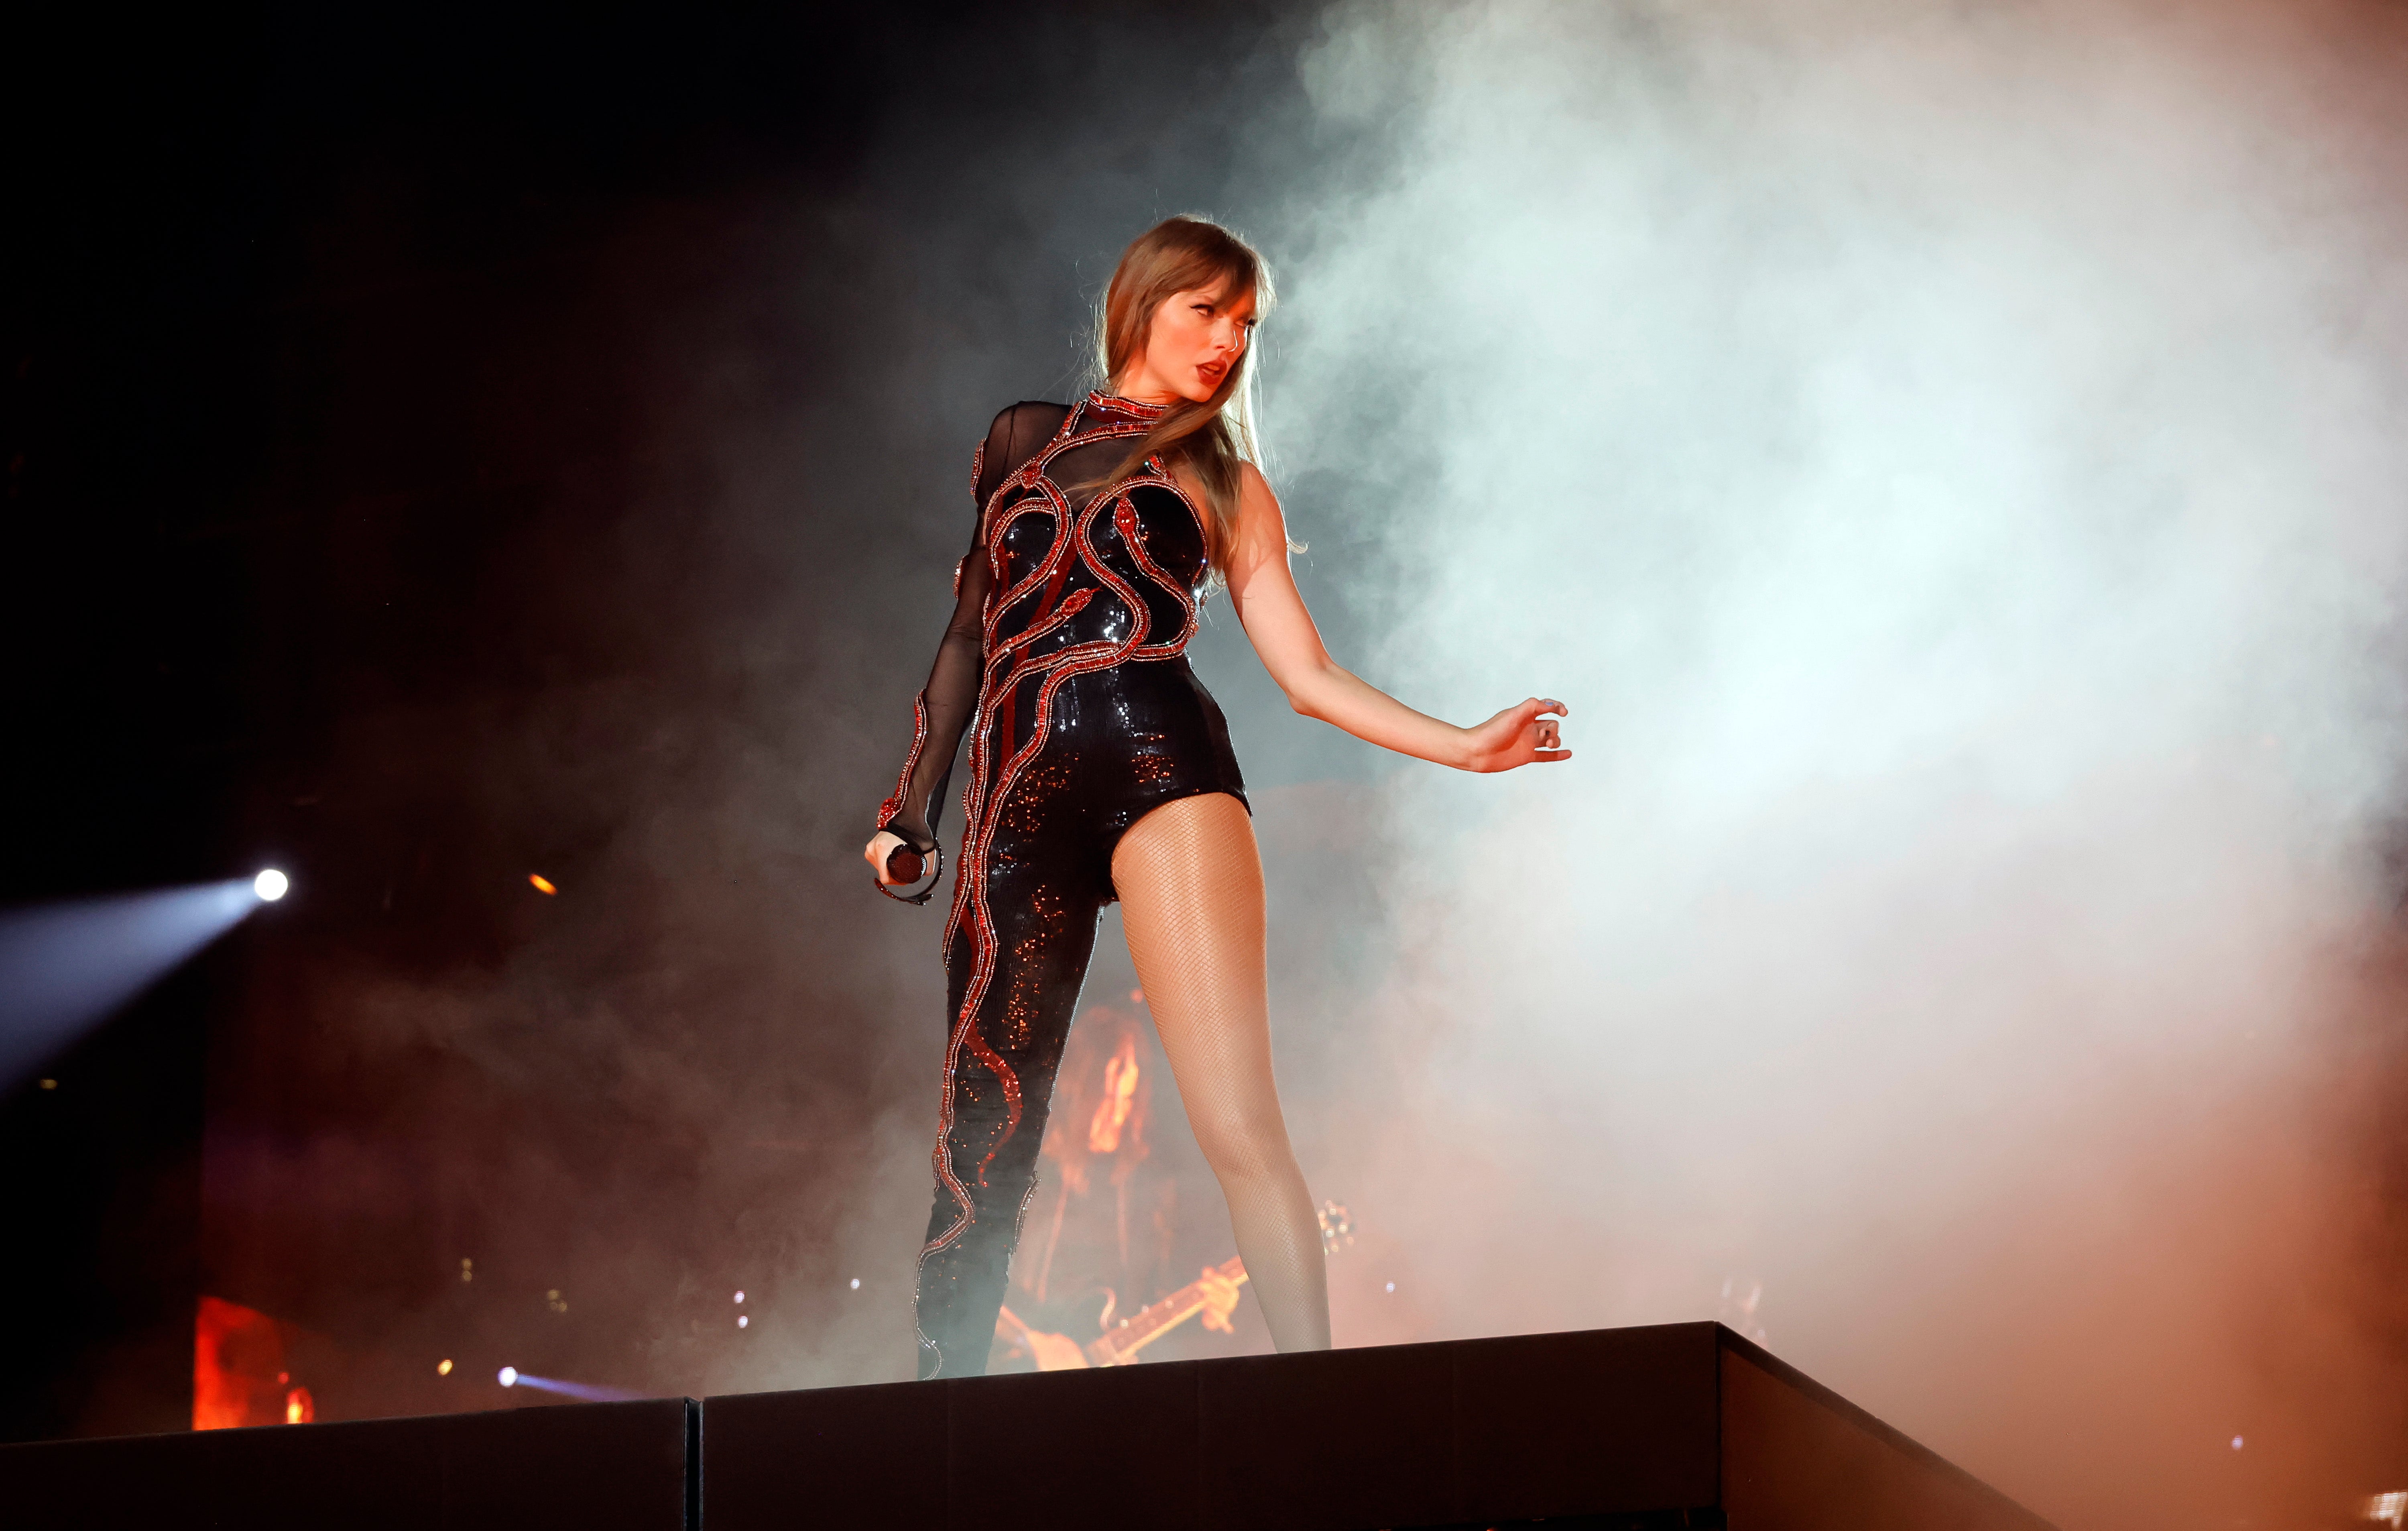 Swift on stage at the Eras Tour